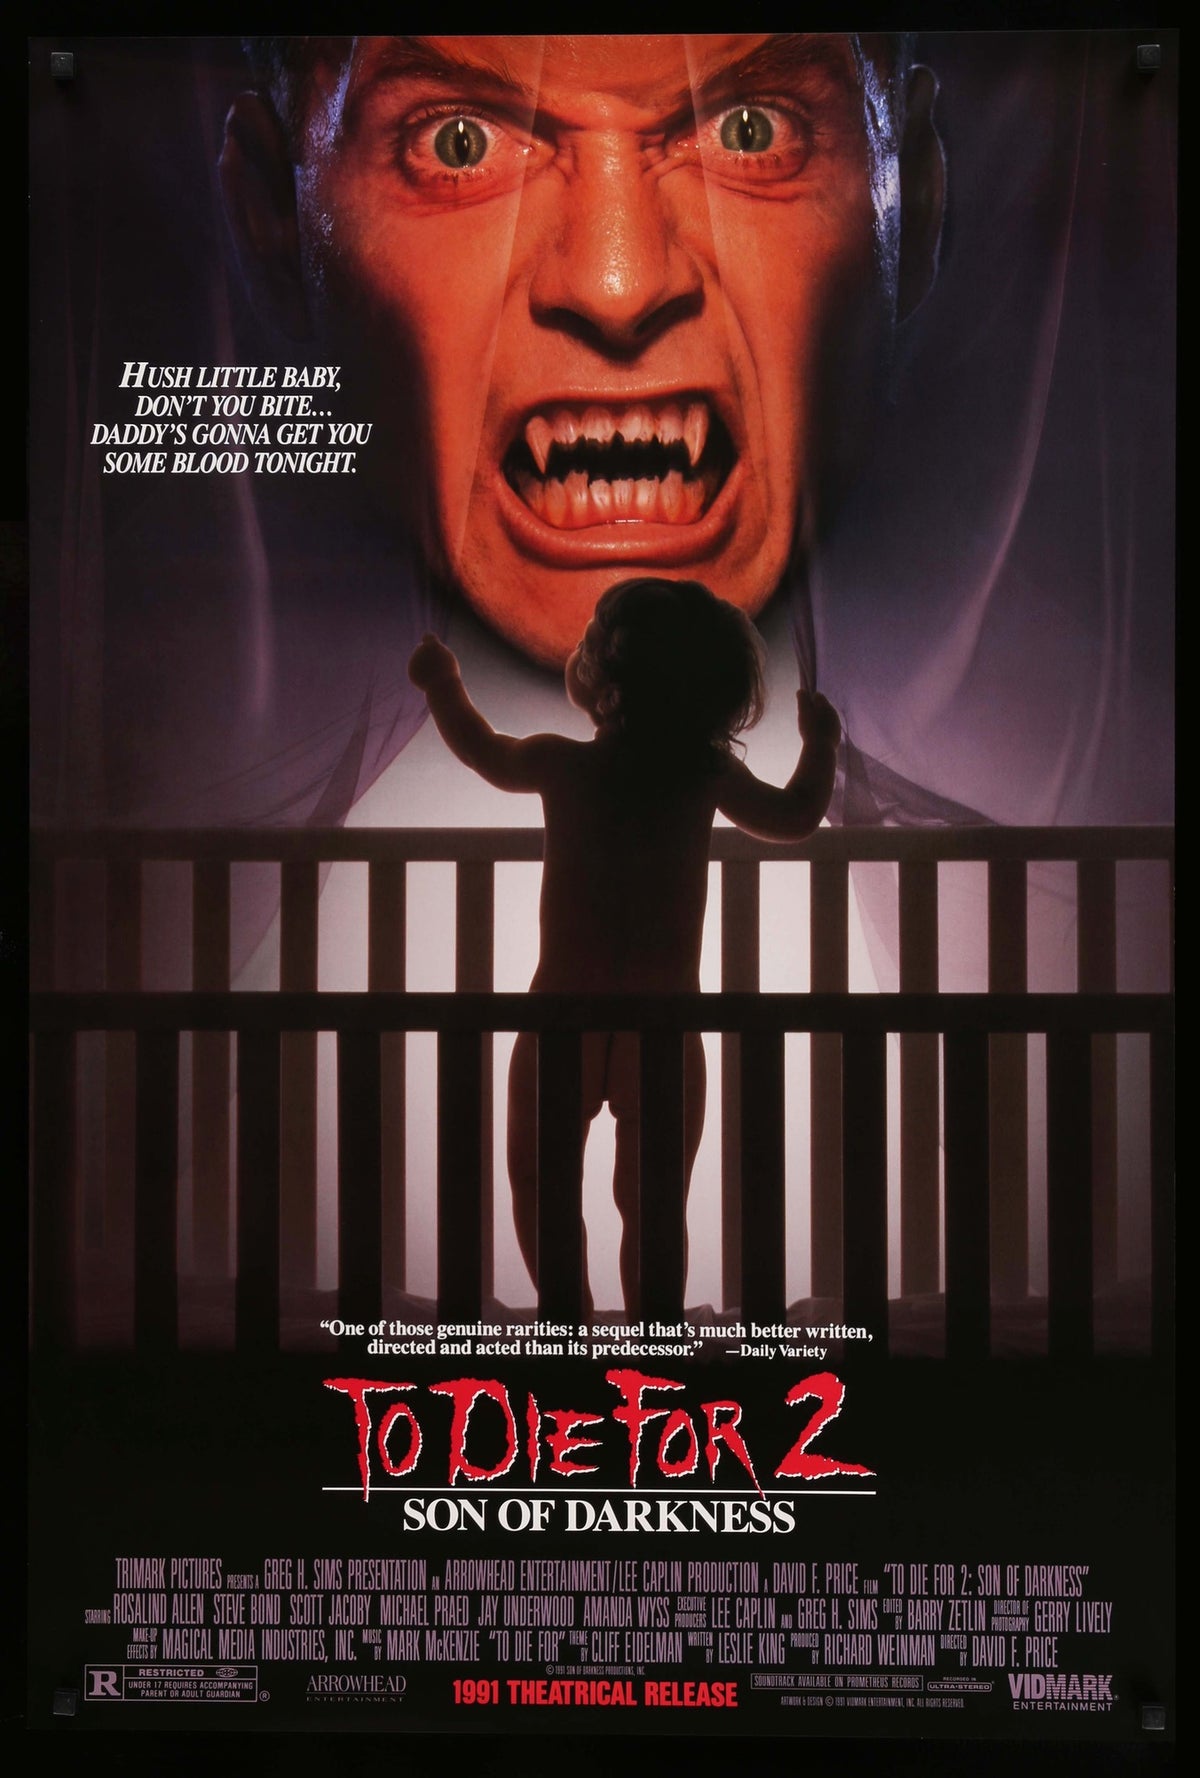 Son of Darkness: To Die For II (1991) original movie poster for sale at Original Film Art